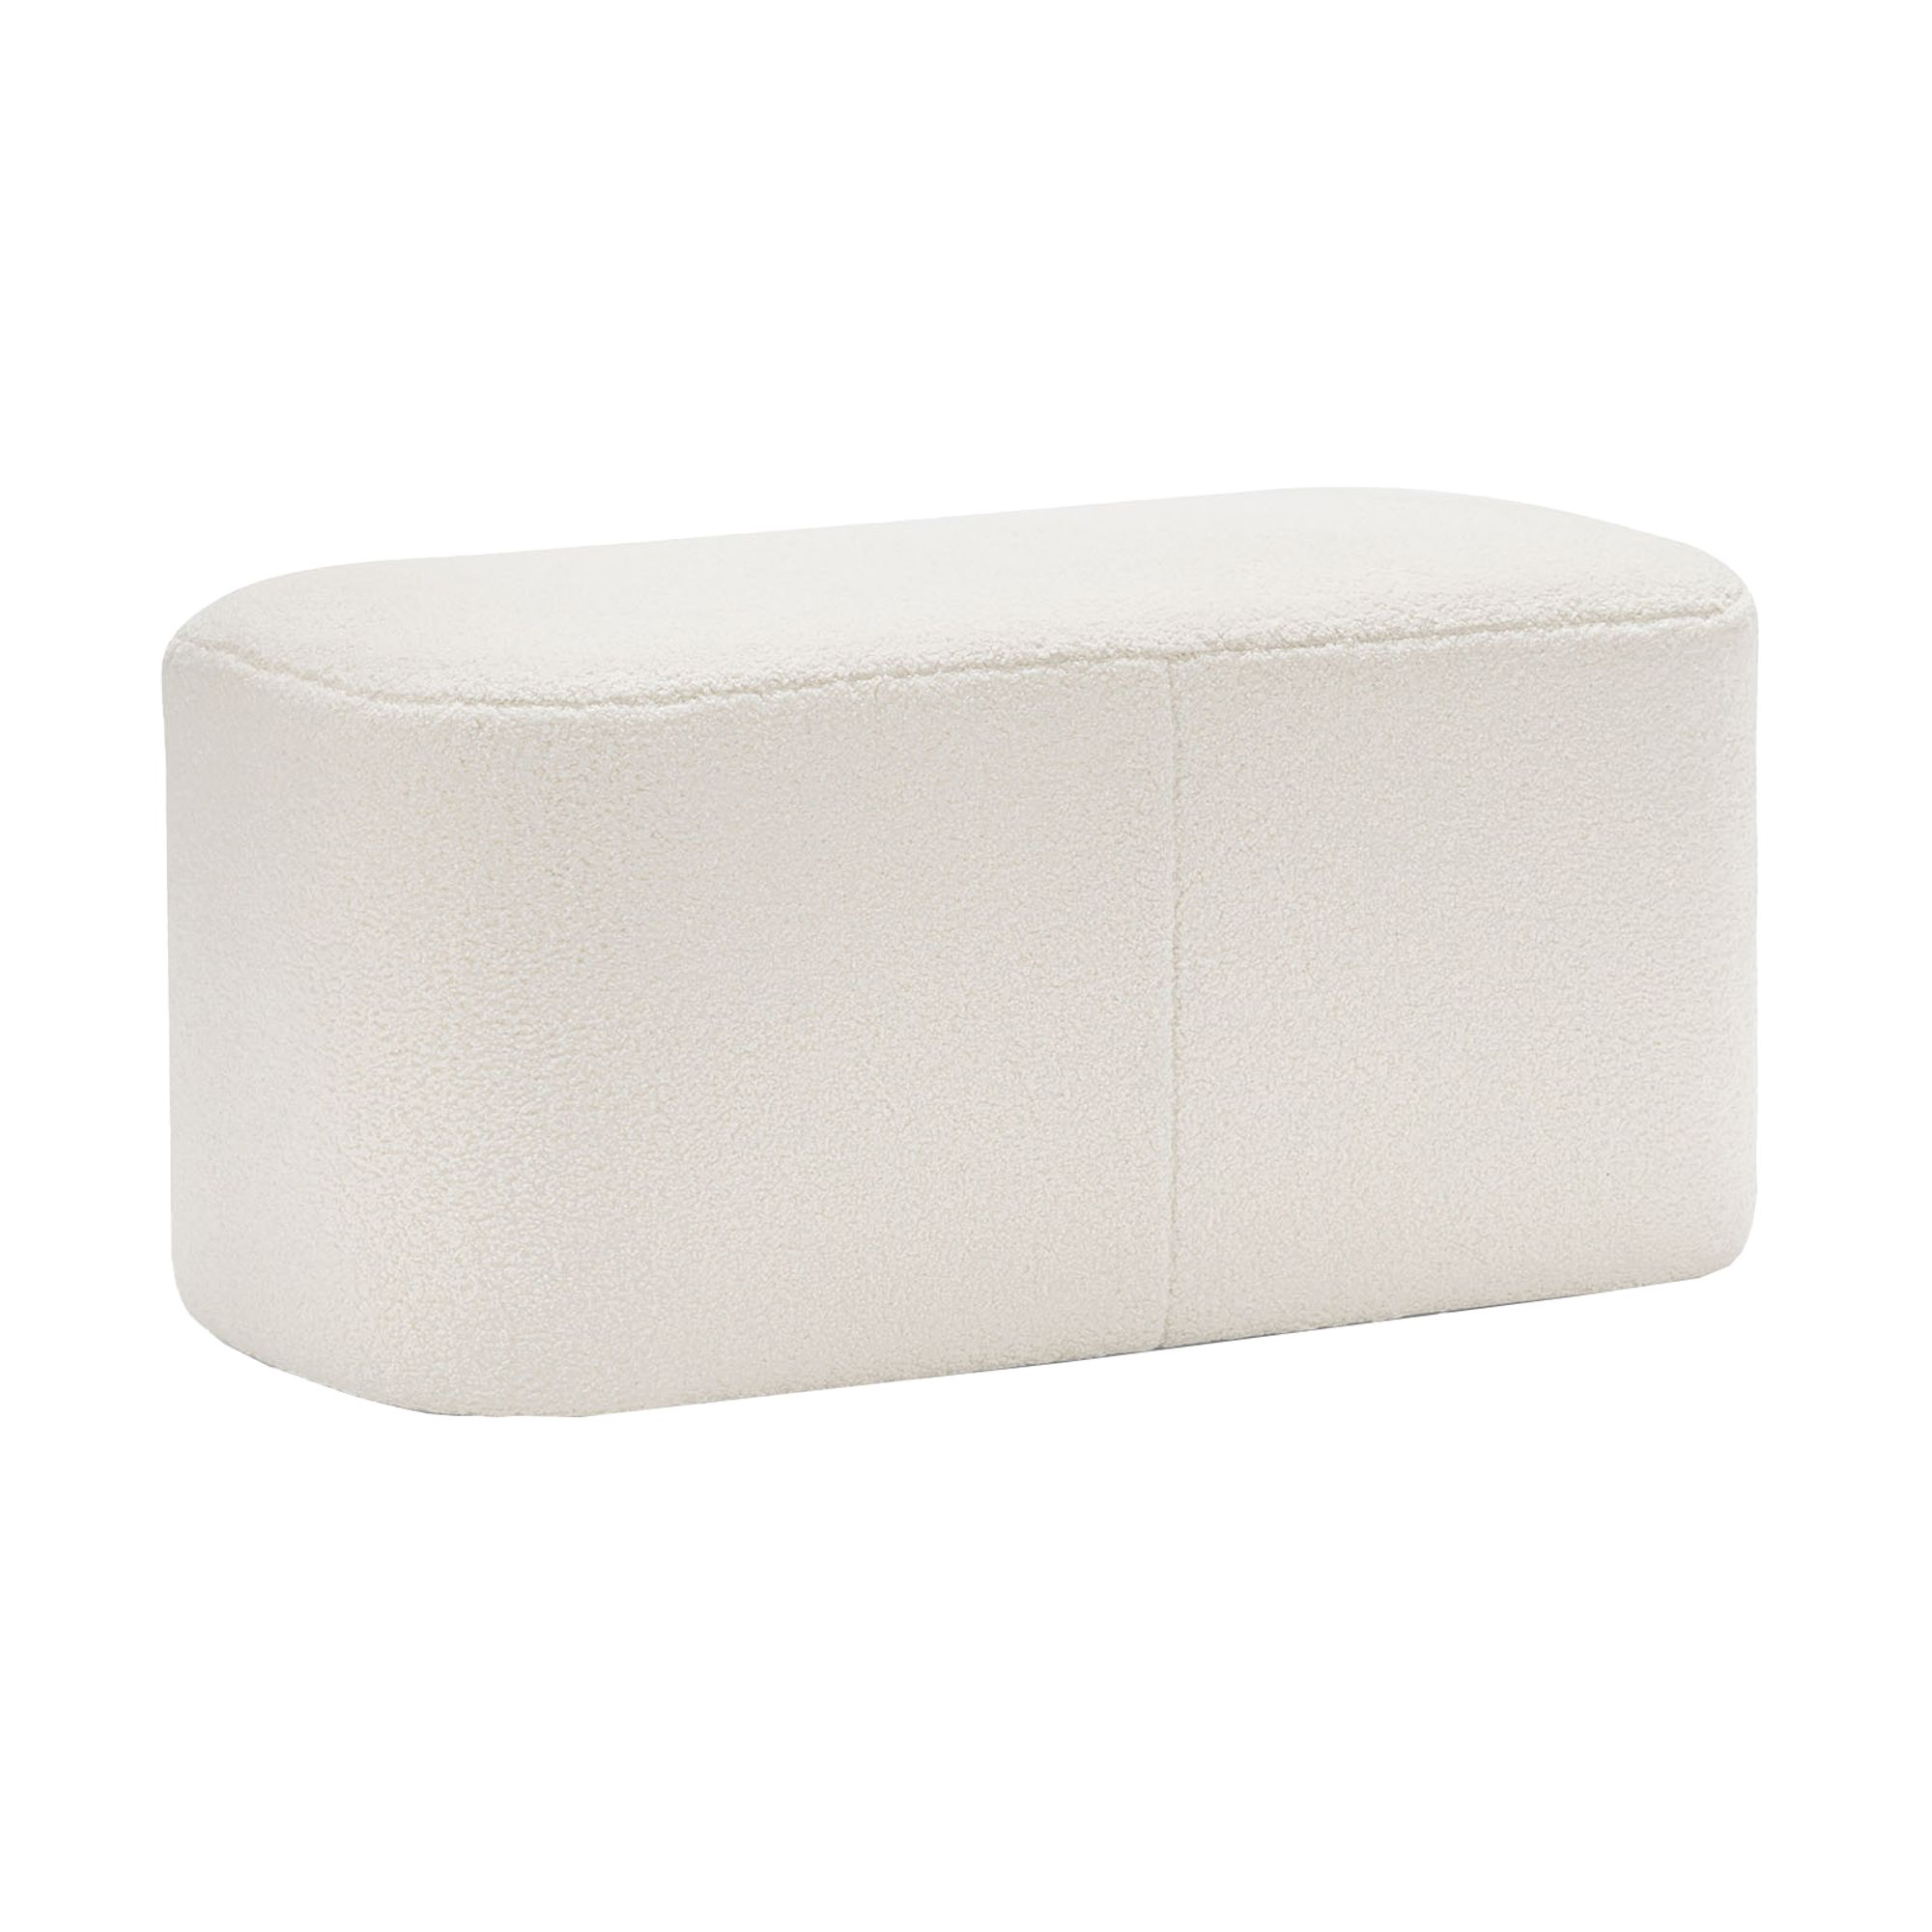 Continental Designs Podd Boucle Ottoman Bench | Temple & Webster Throughout Boucle Ottomans (View 14 of 15)